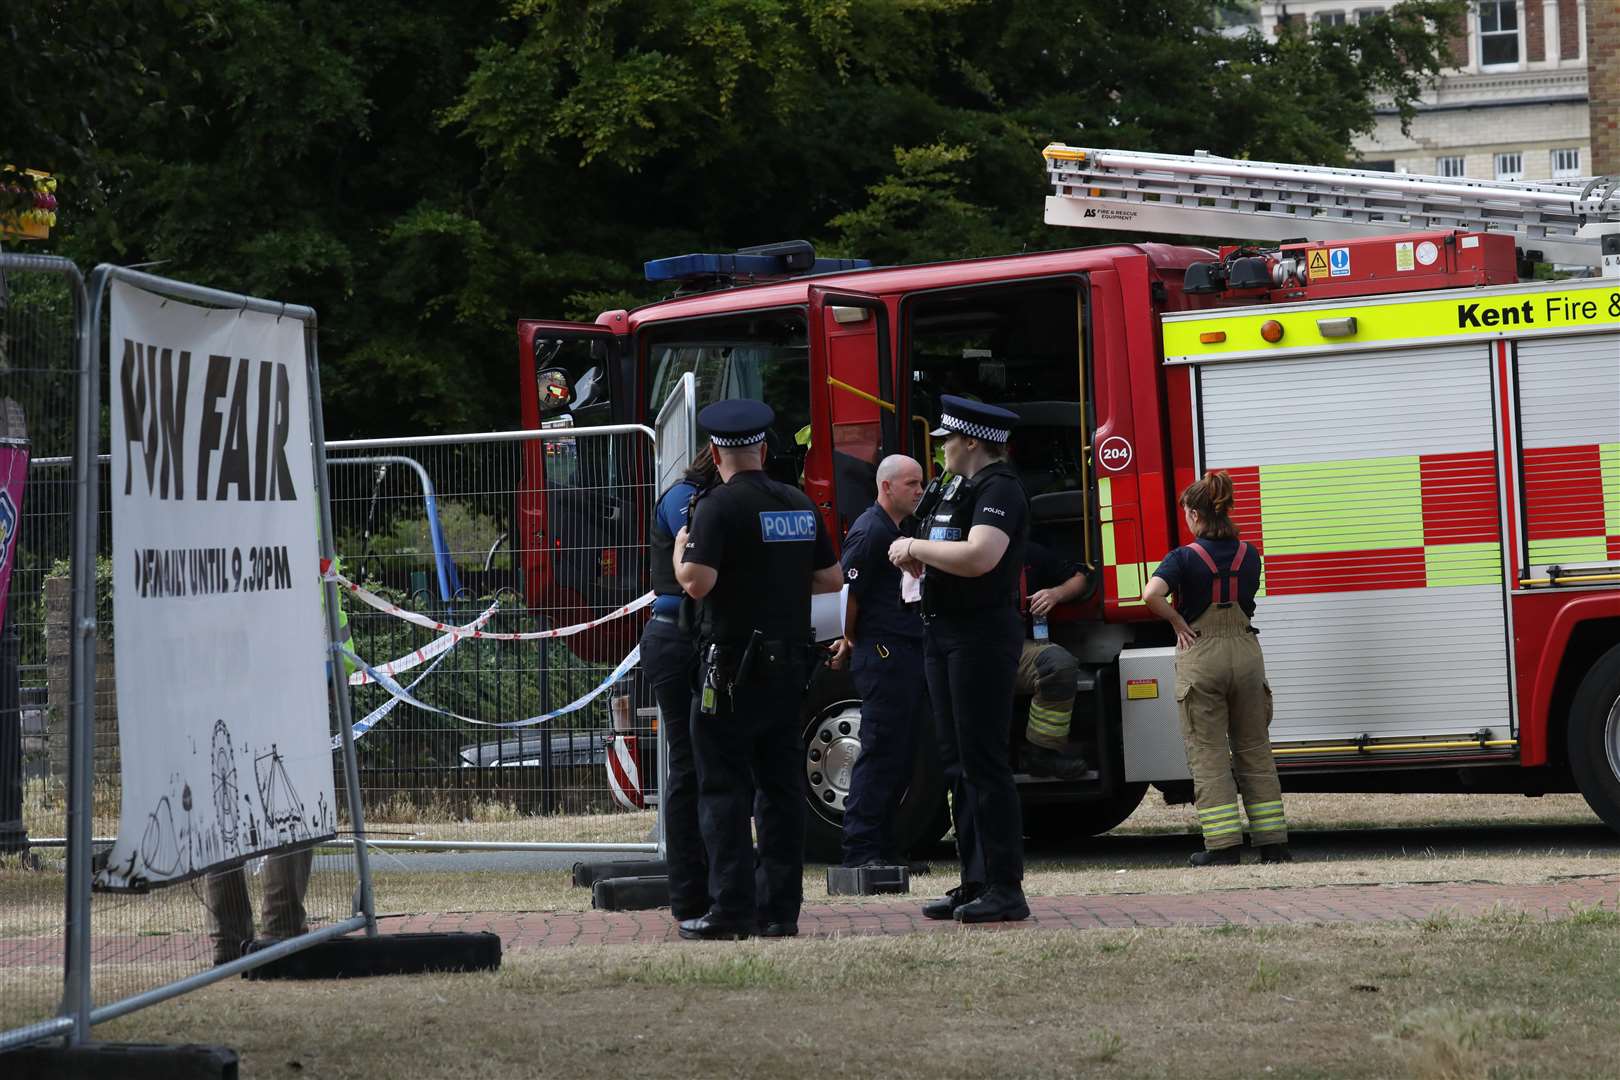 A teenager was sadly killed at the fun fair. Picture: UKNIP